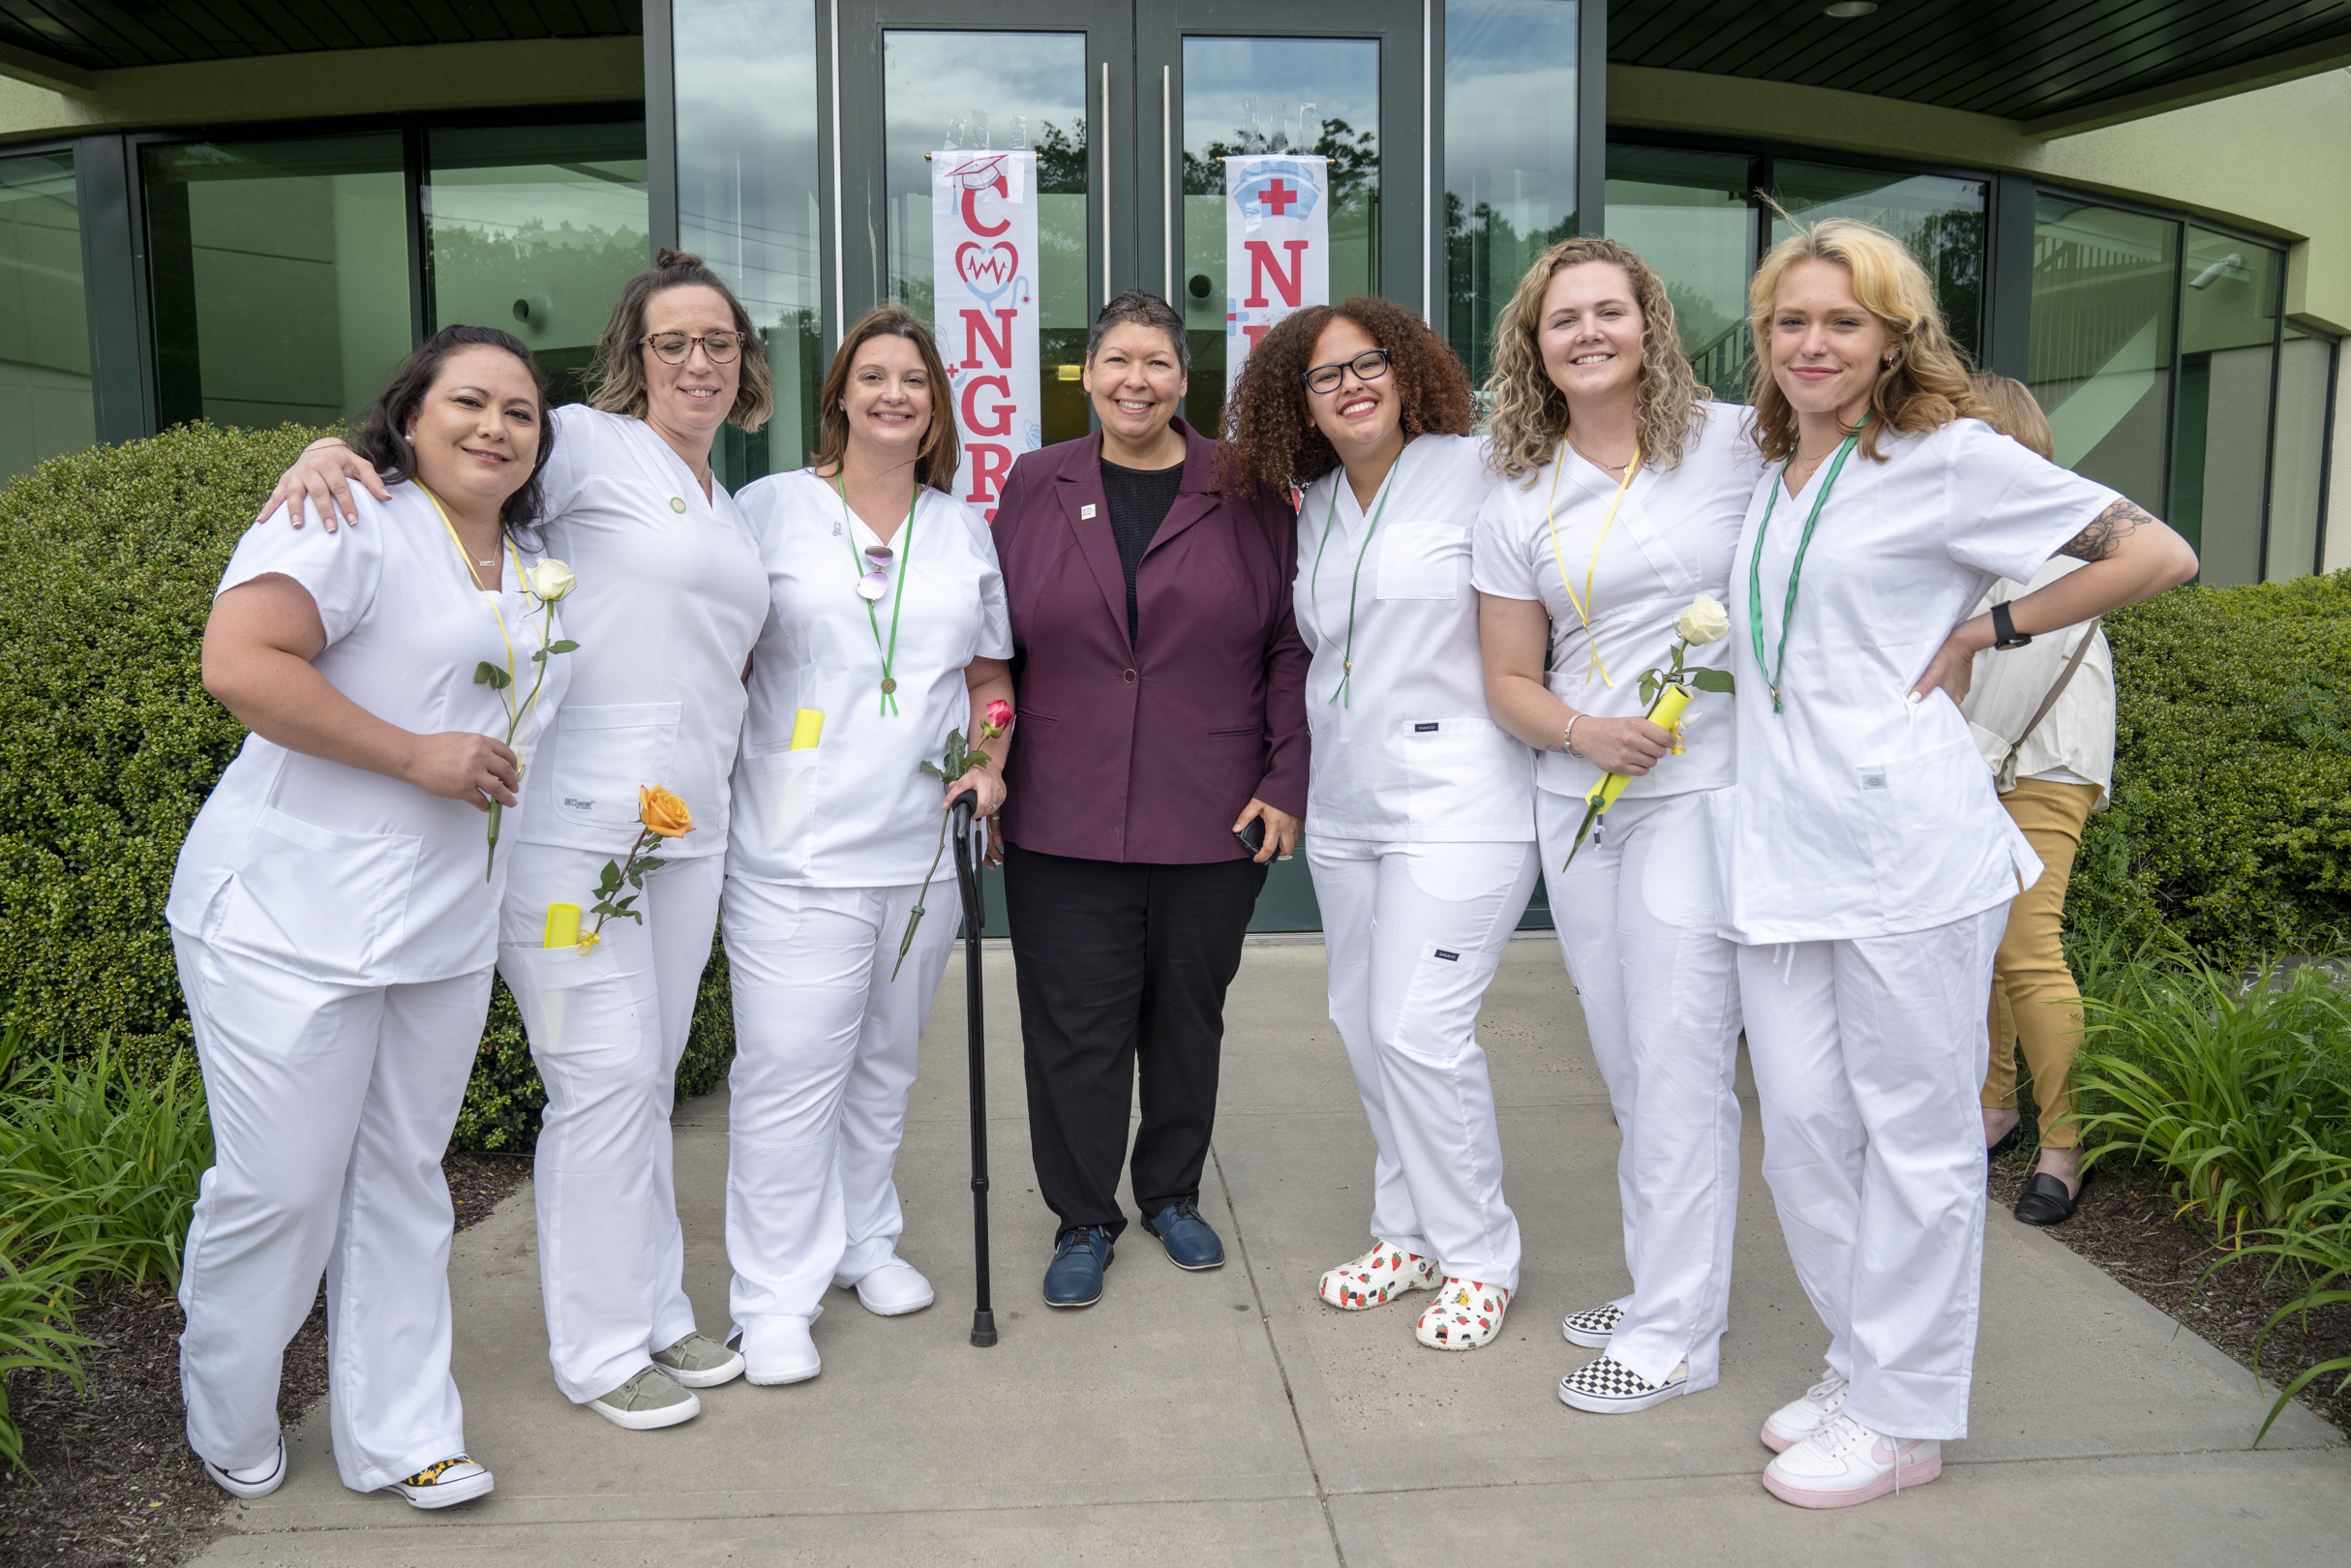 Christina Royal poses with a group of nurses in white scrubs